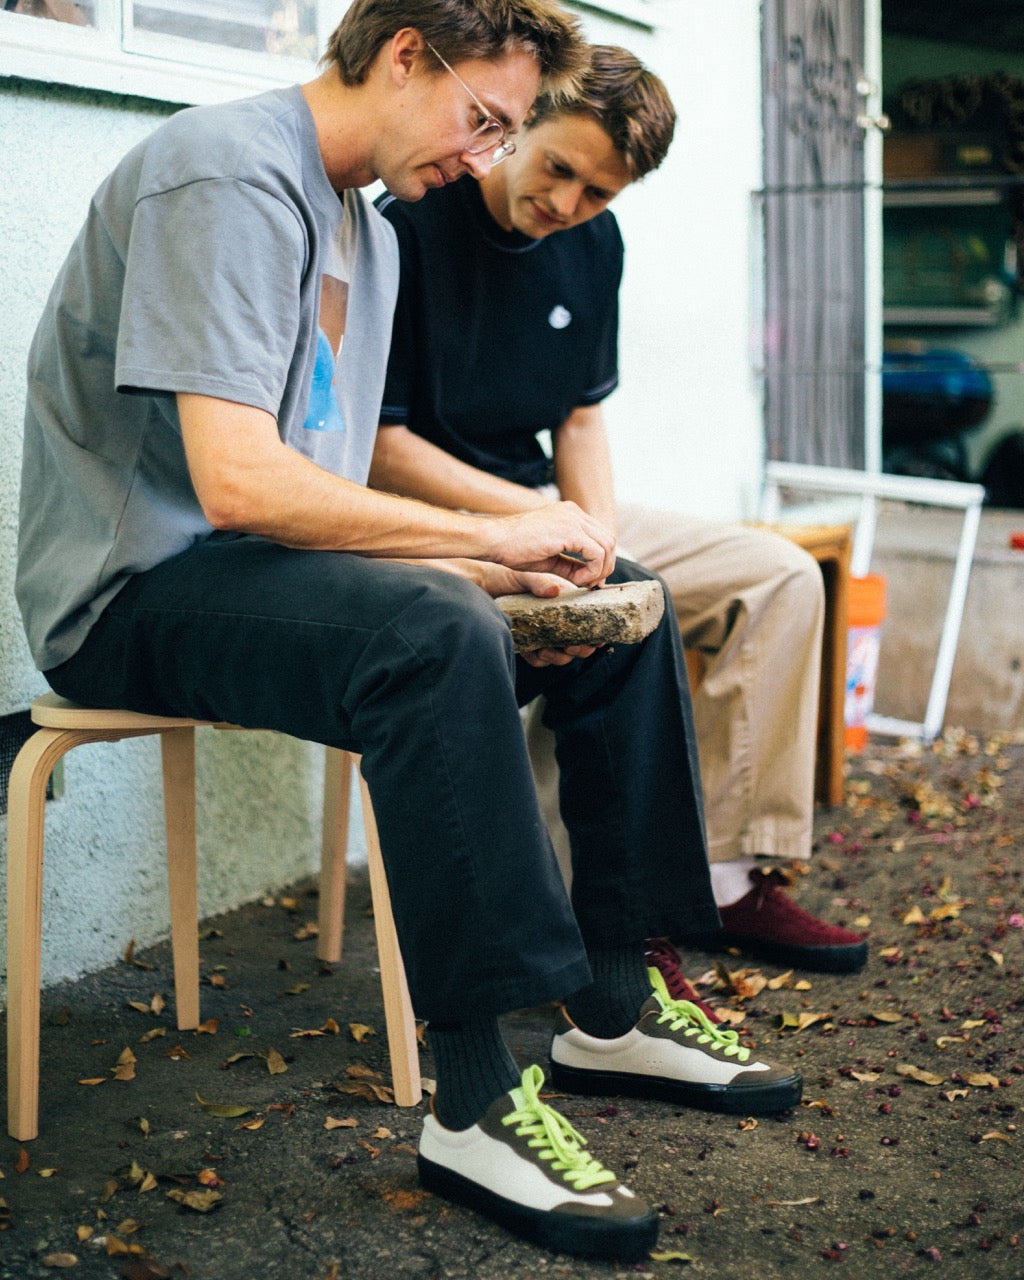 Image of skaters wearing the new Last Resort VM003 Chris Milic Skate Shoes